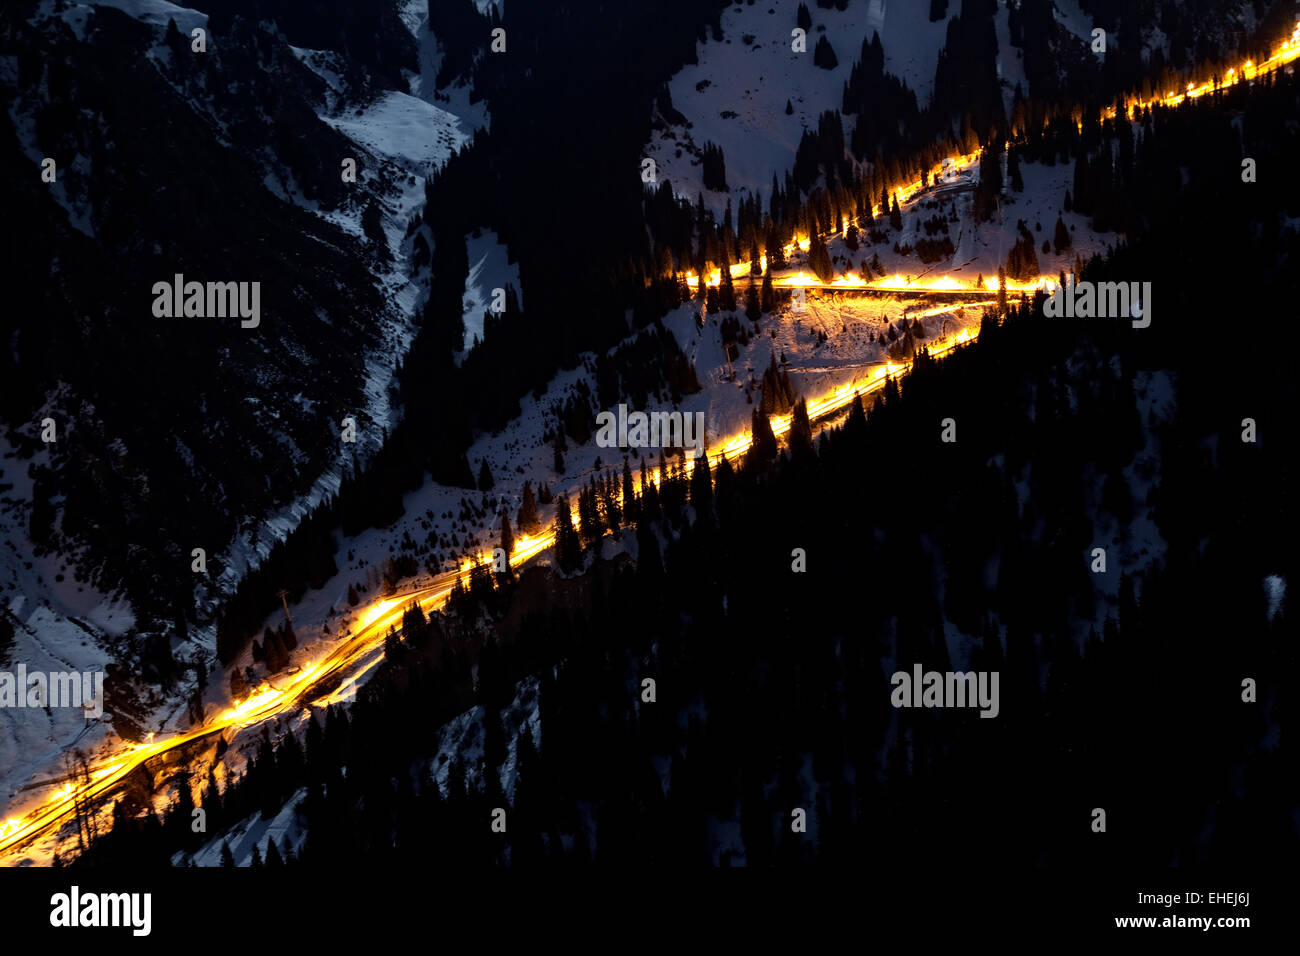 Night Road in winter mountains Stock Photo